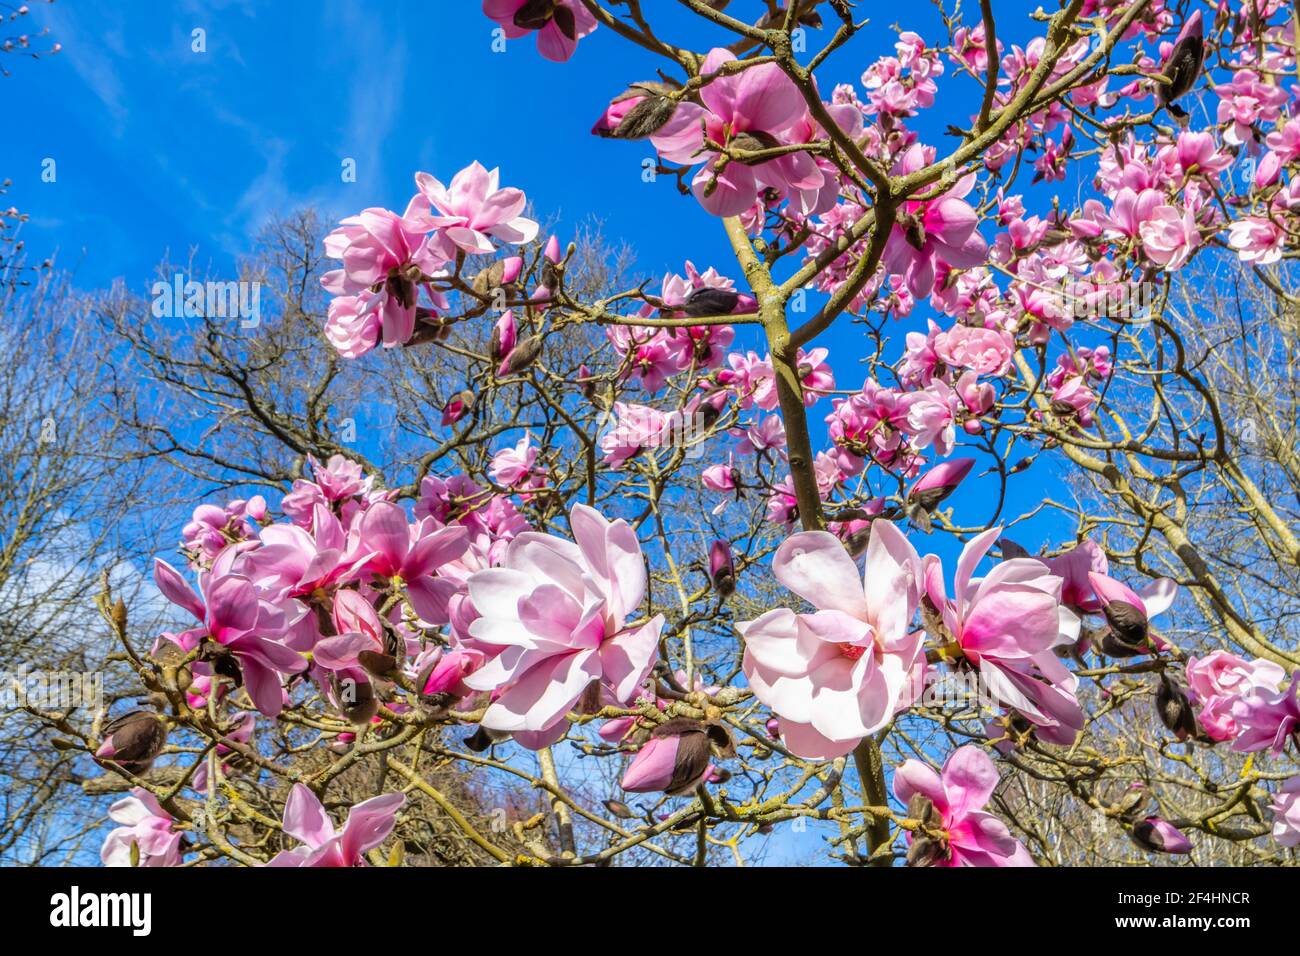 Large salmon pink flowers of the deciduous magnolia 'Caerhays Belle' tree flowering in spring in RHS Garden, Wisley, Surrey, south-east England Stock Photo